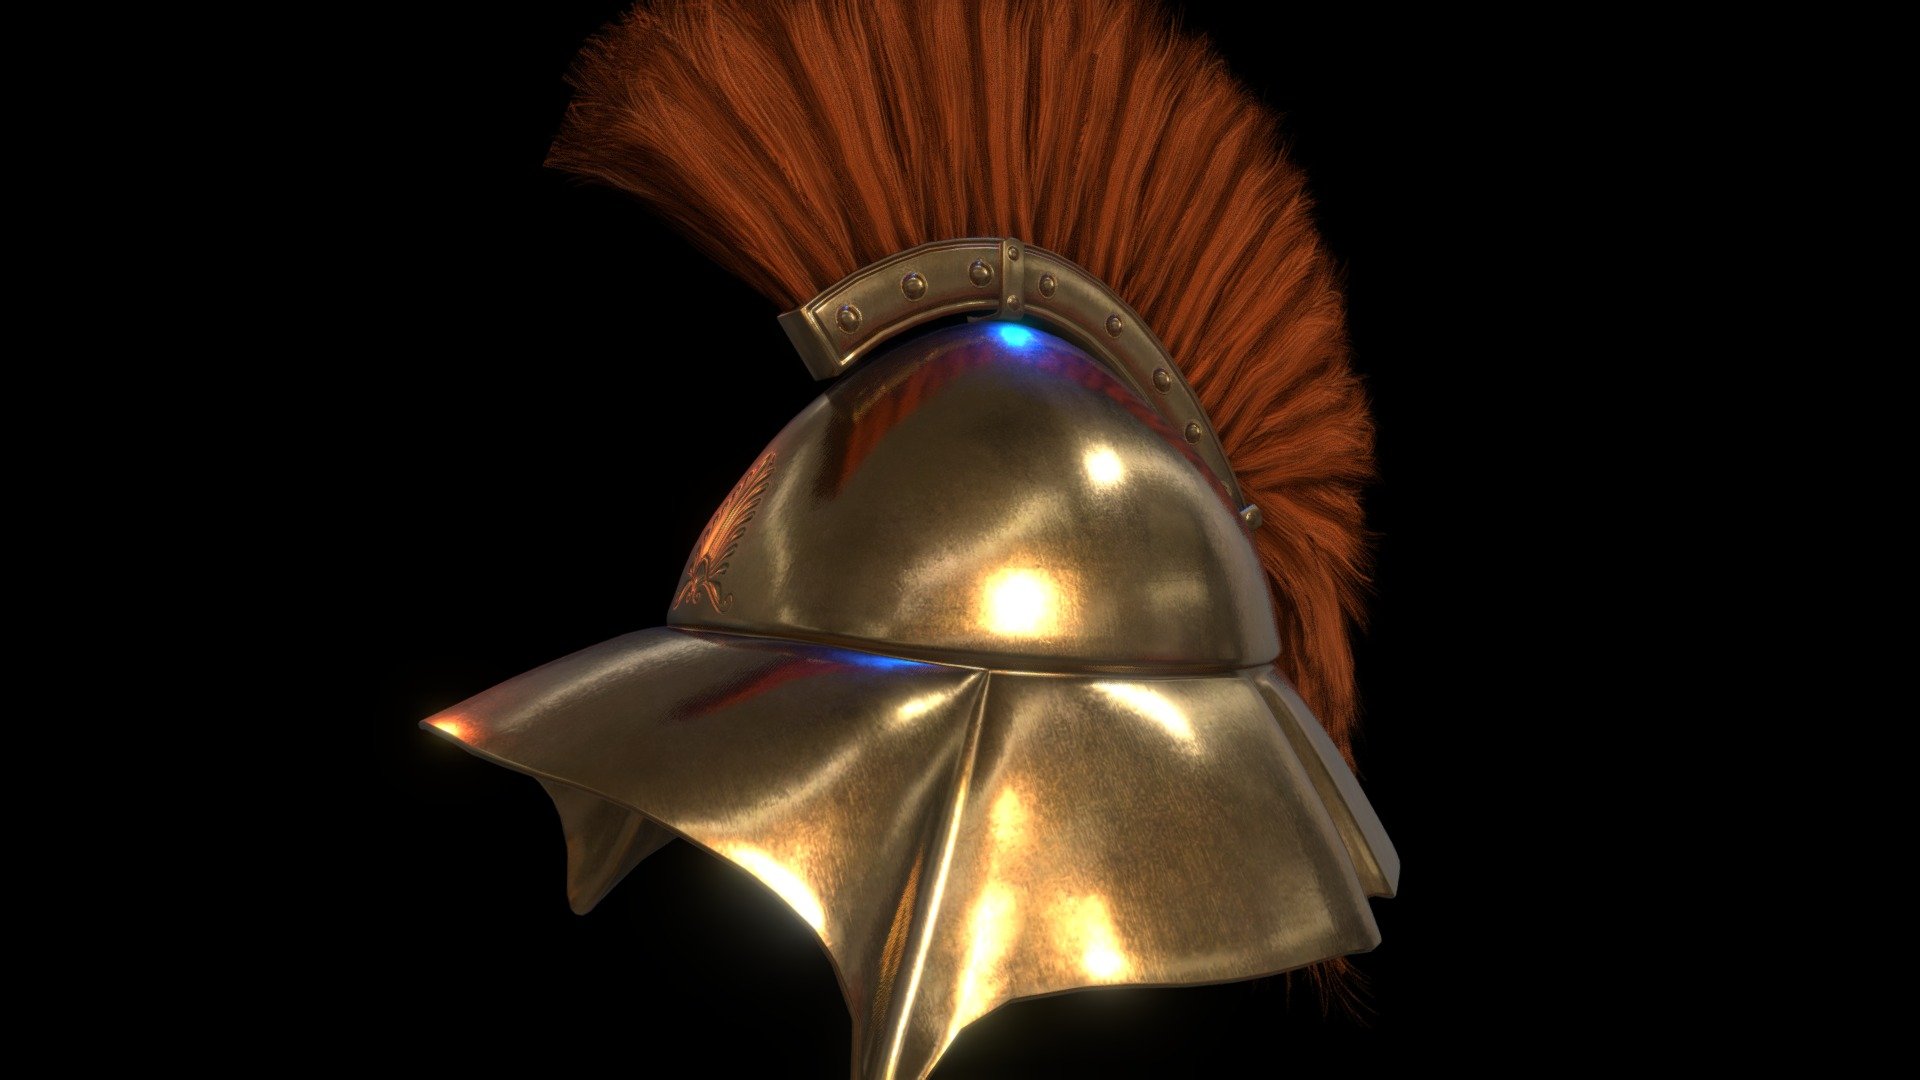 A Beotian Helmet type with red crest.

Shader in Pbr workflow (Diffuse, Roughness, Metallic, Normal, Ao, Alpha) in 2K 3d model